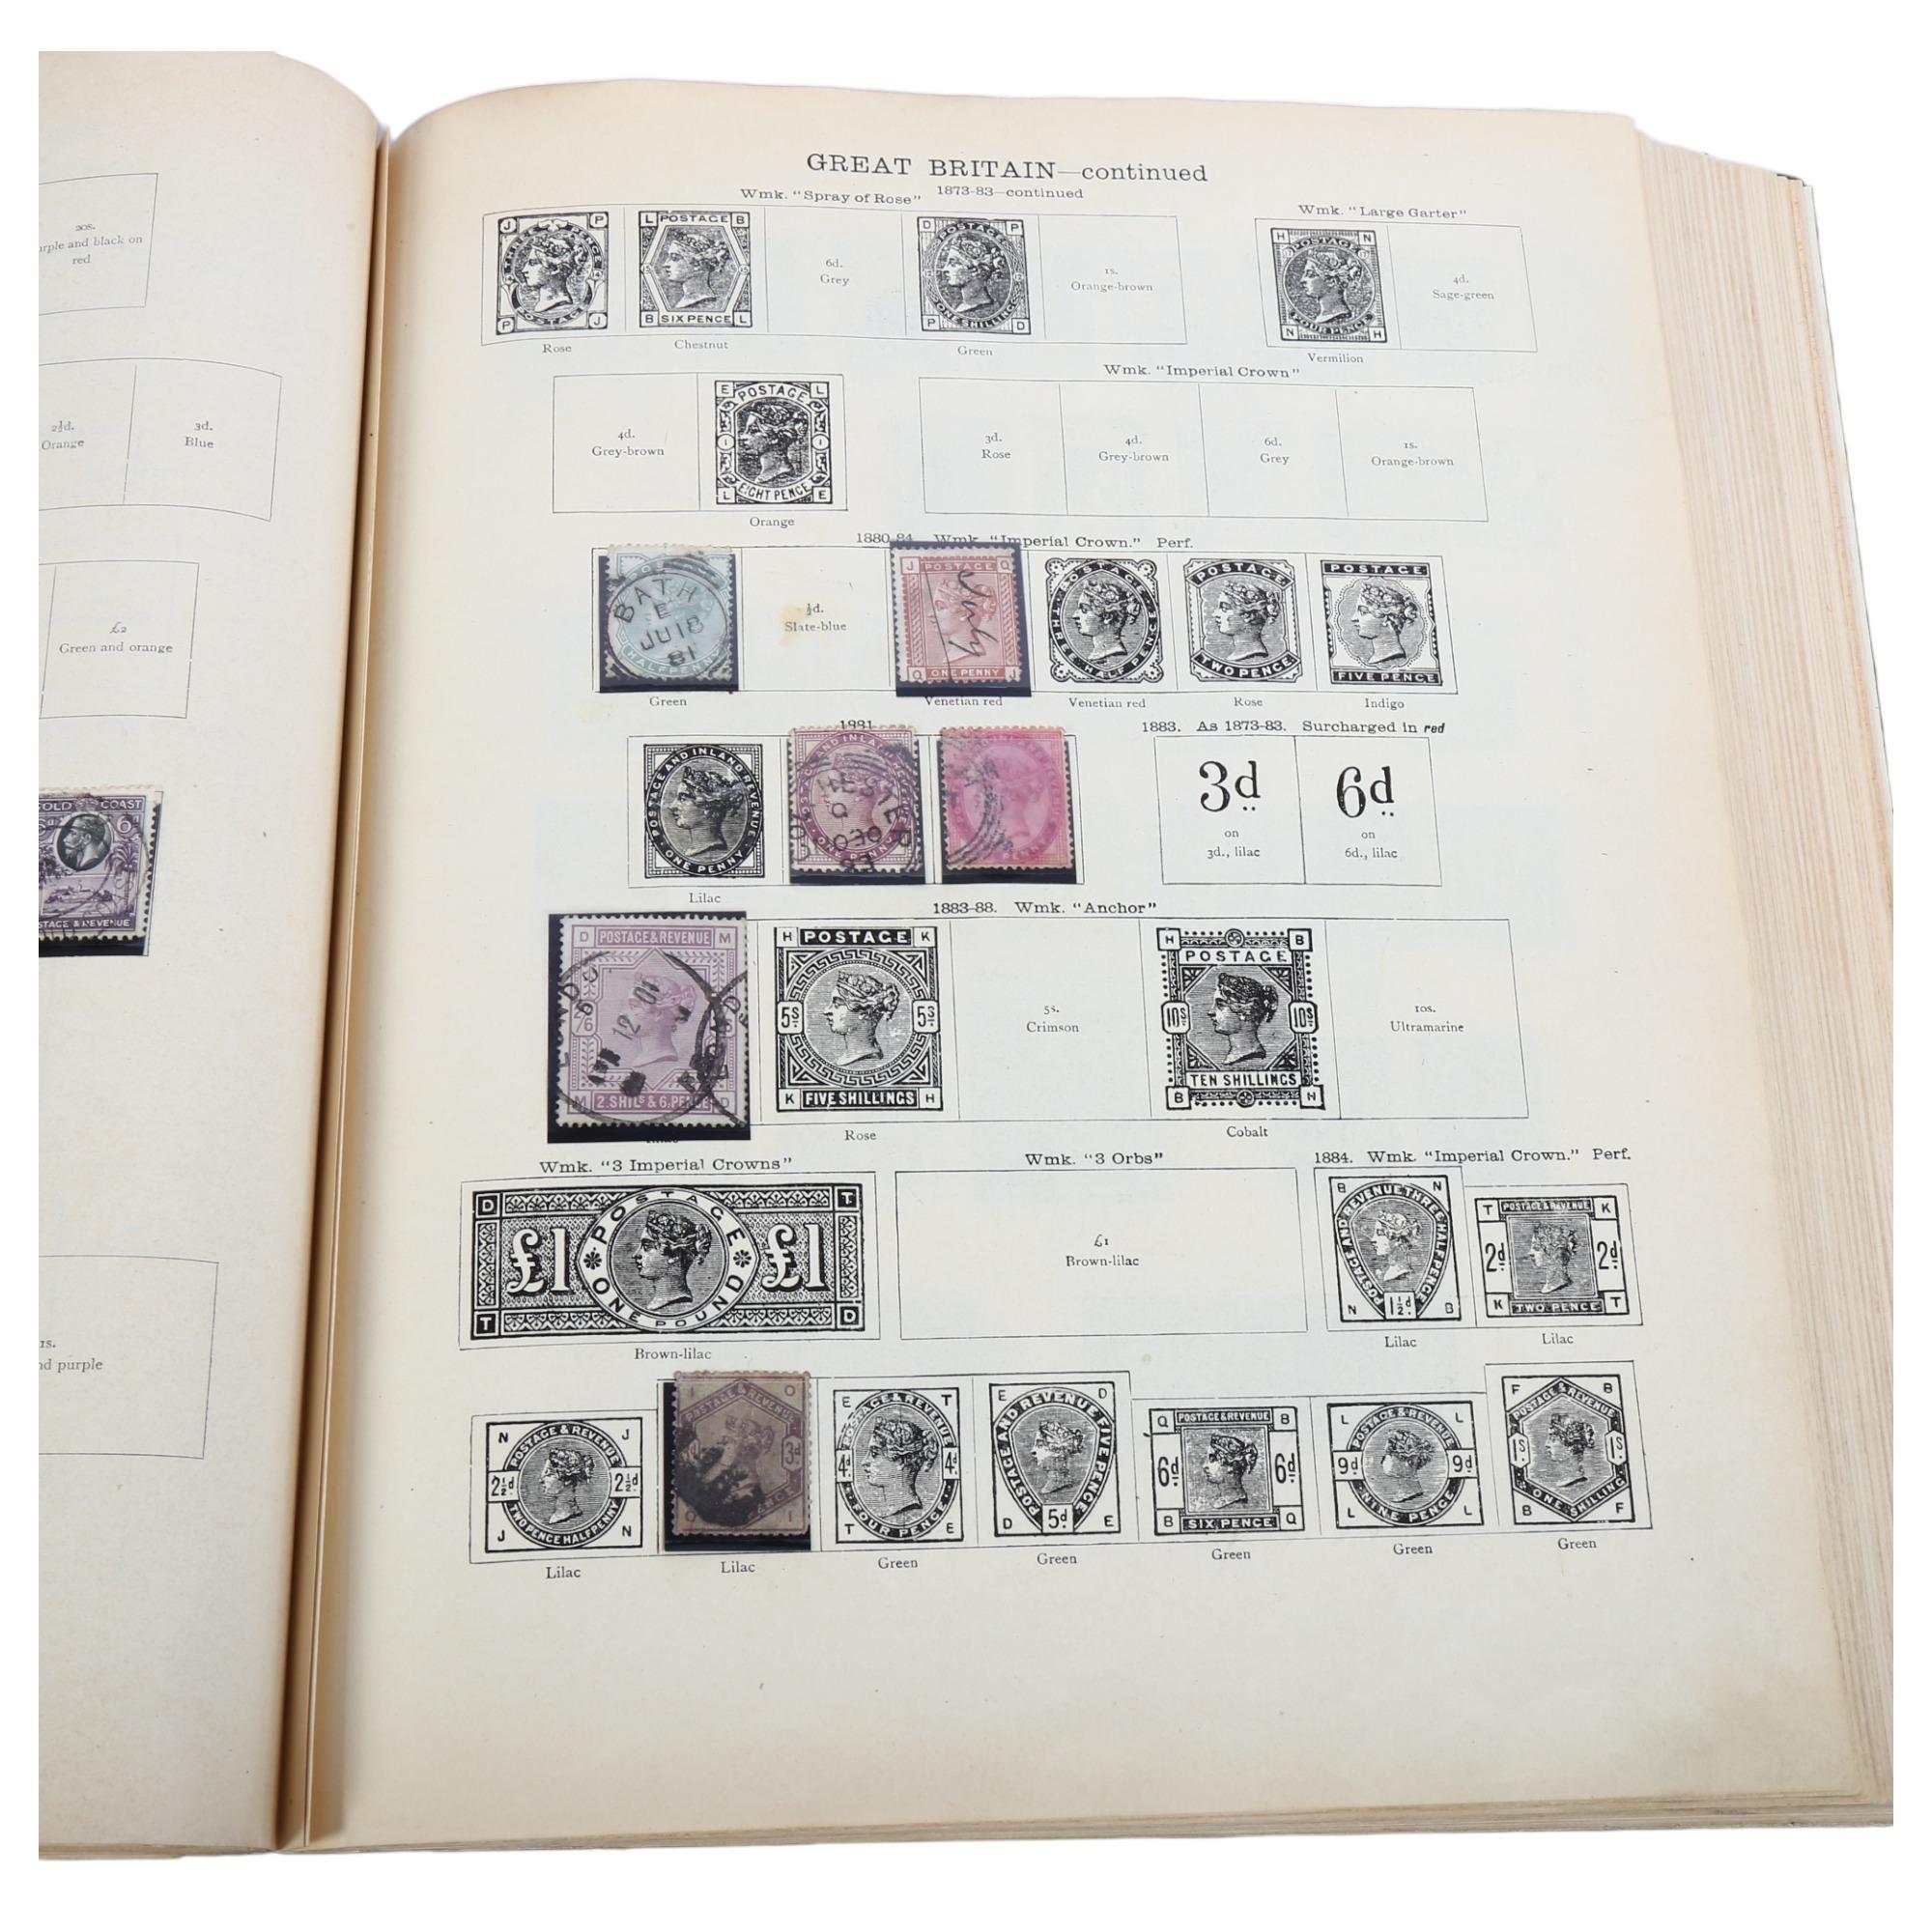 A new Ideal postage stamp album, containing Commonwealth and worldwide stamps, including the